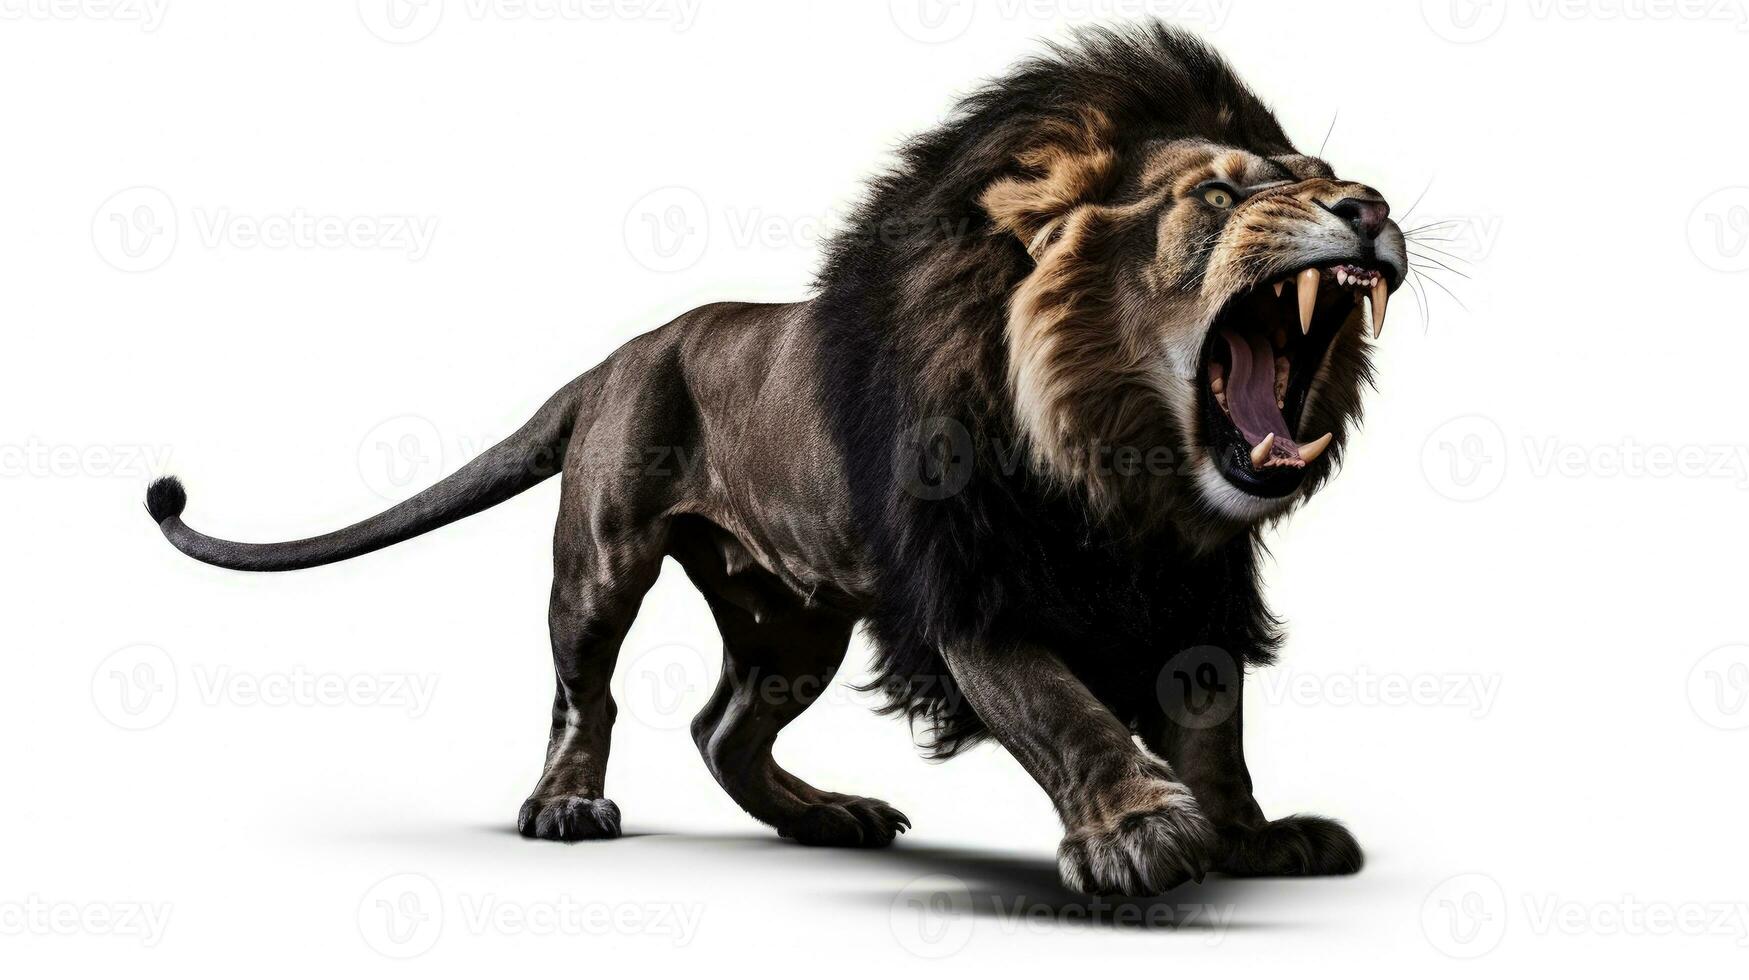 Adult male lion Panthera leo jumping with open mouth on white background. silhouette concept photo